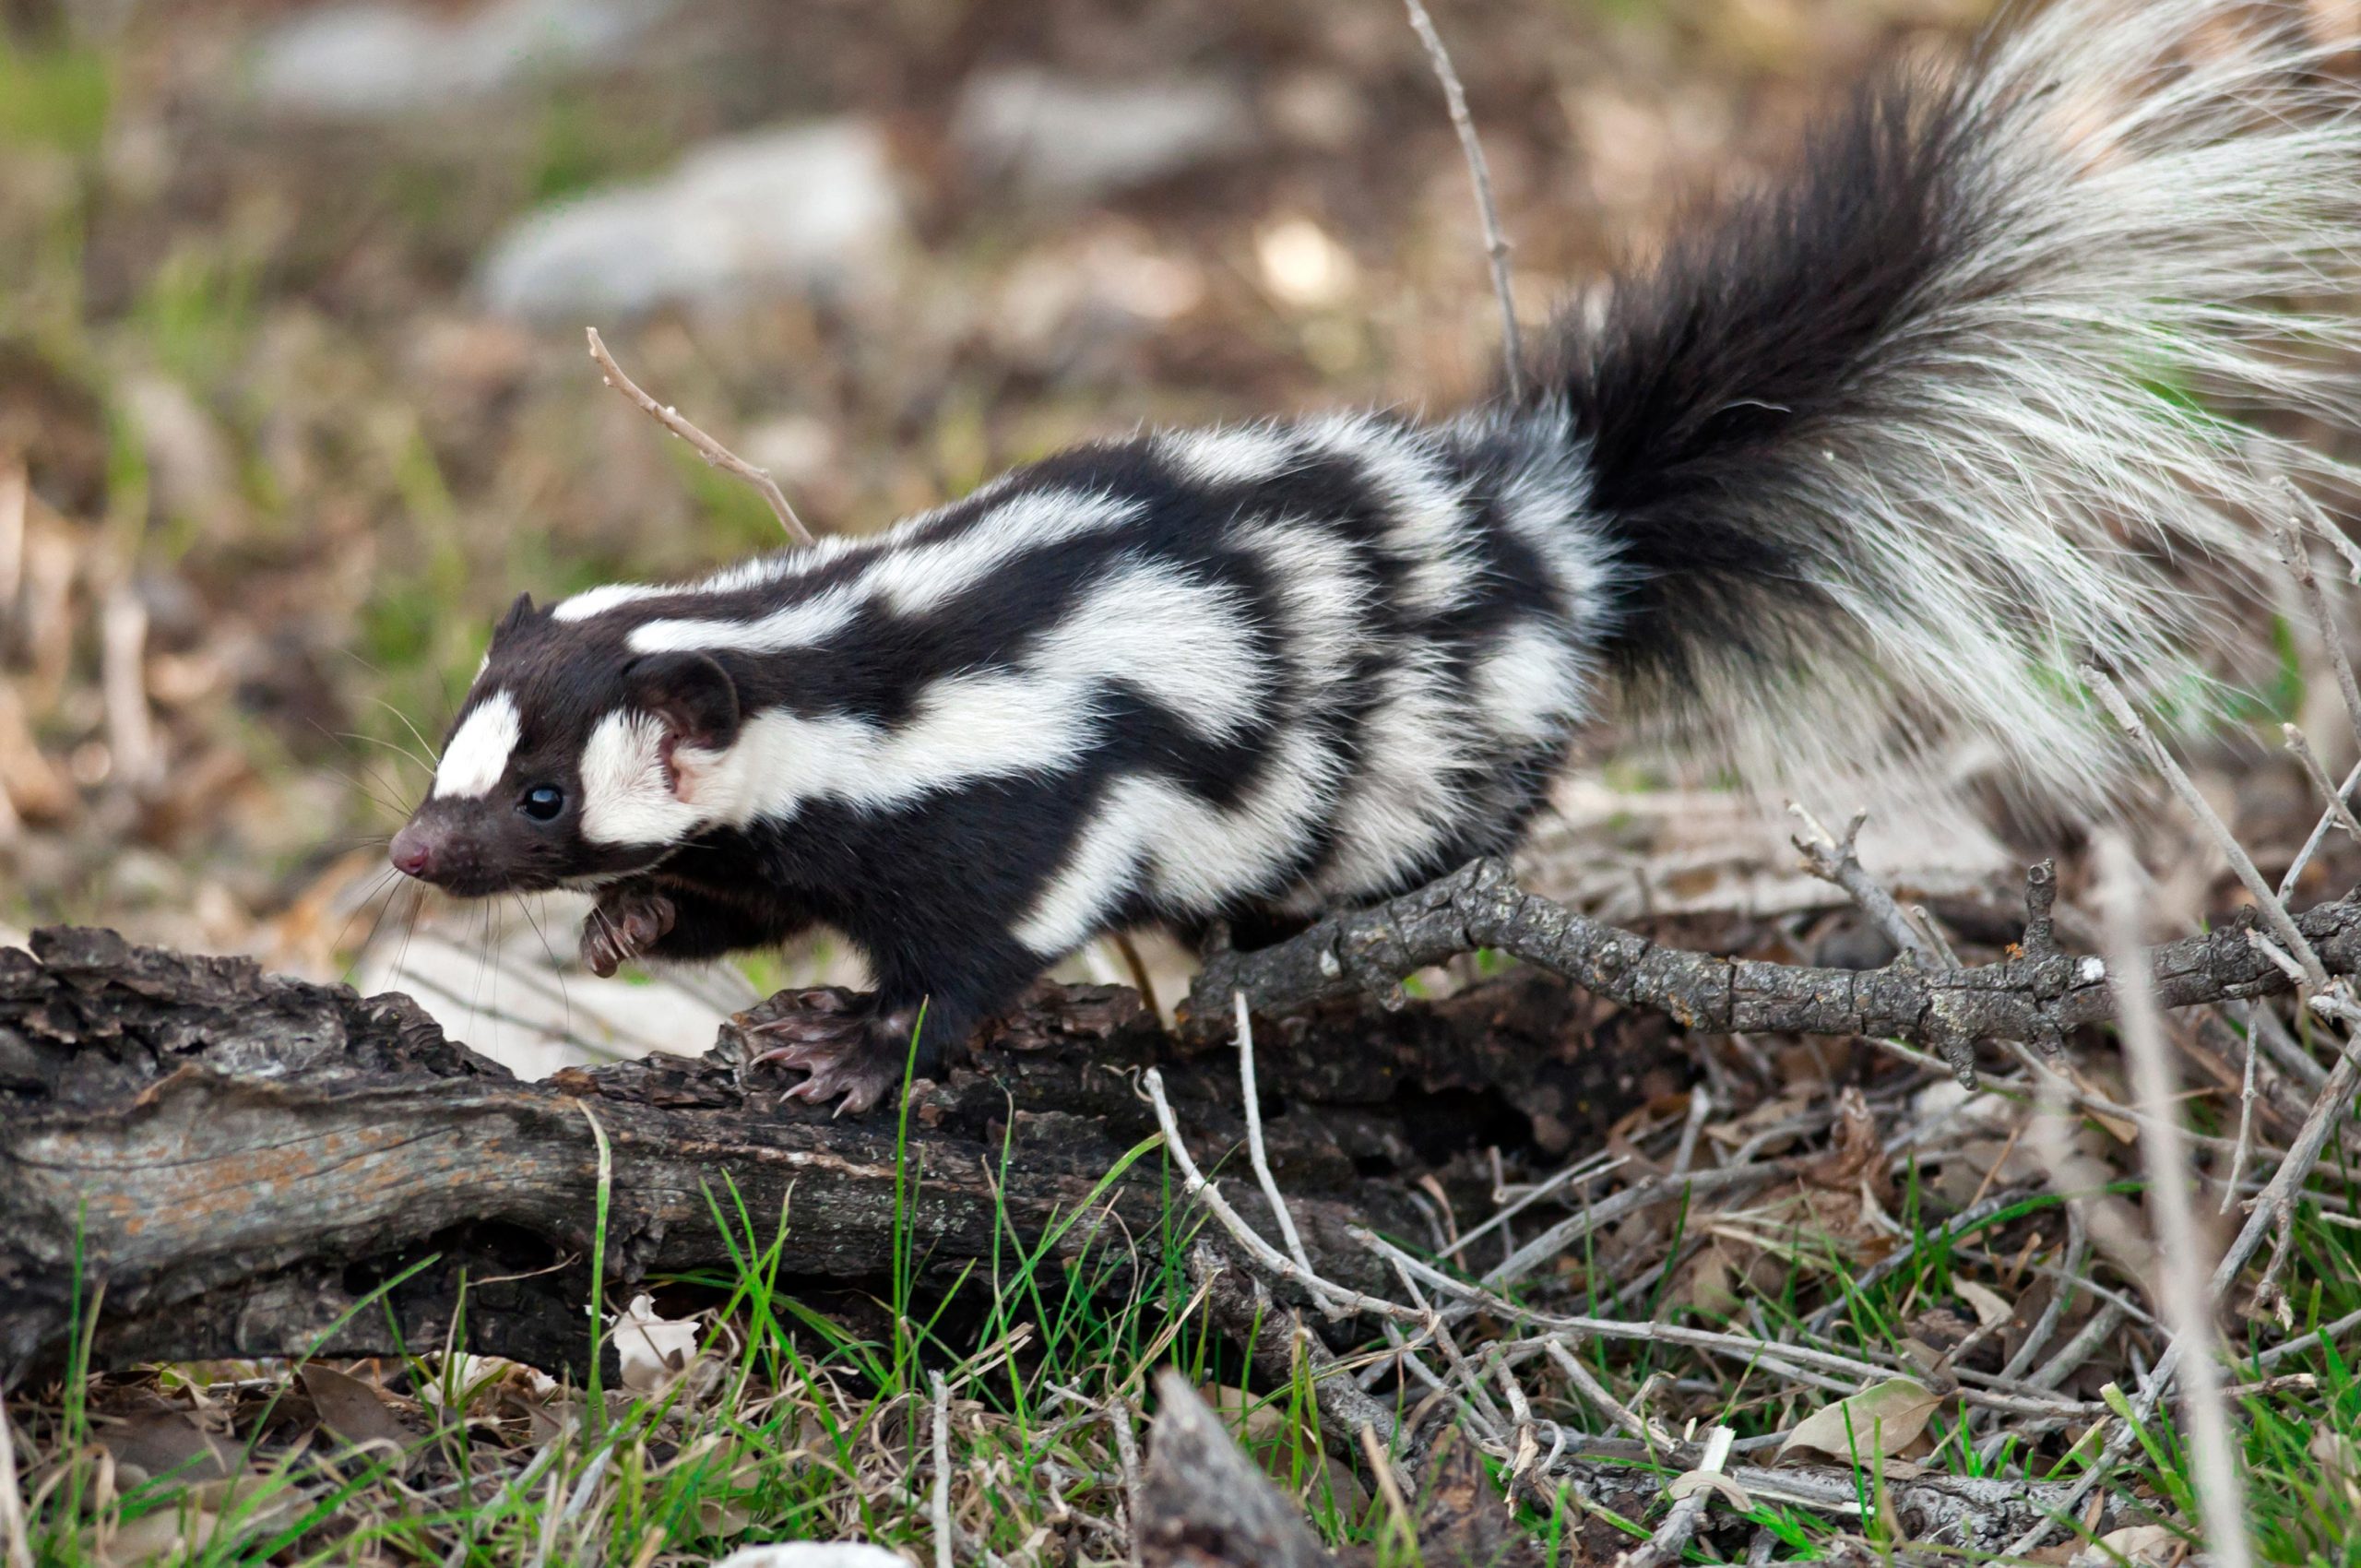 Three New Species of Hand-Standing Spotted Skunks Discovered